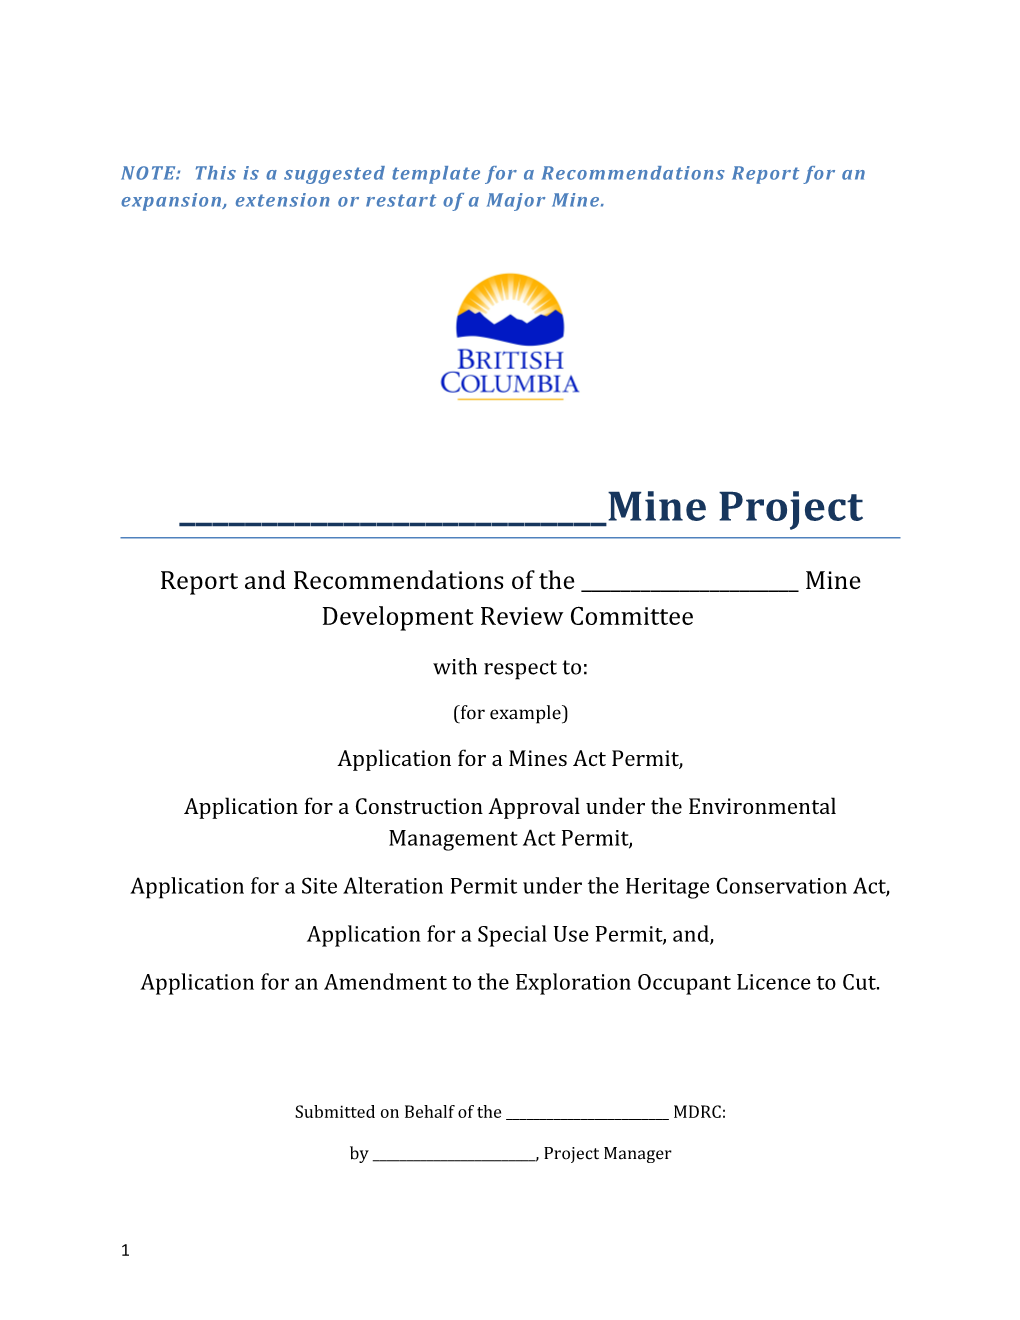 Report and Recommendations of the ______Mine Development Review Committee